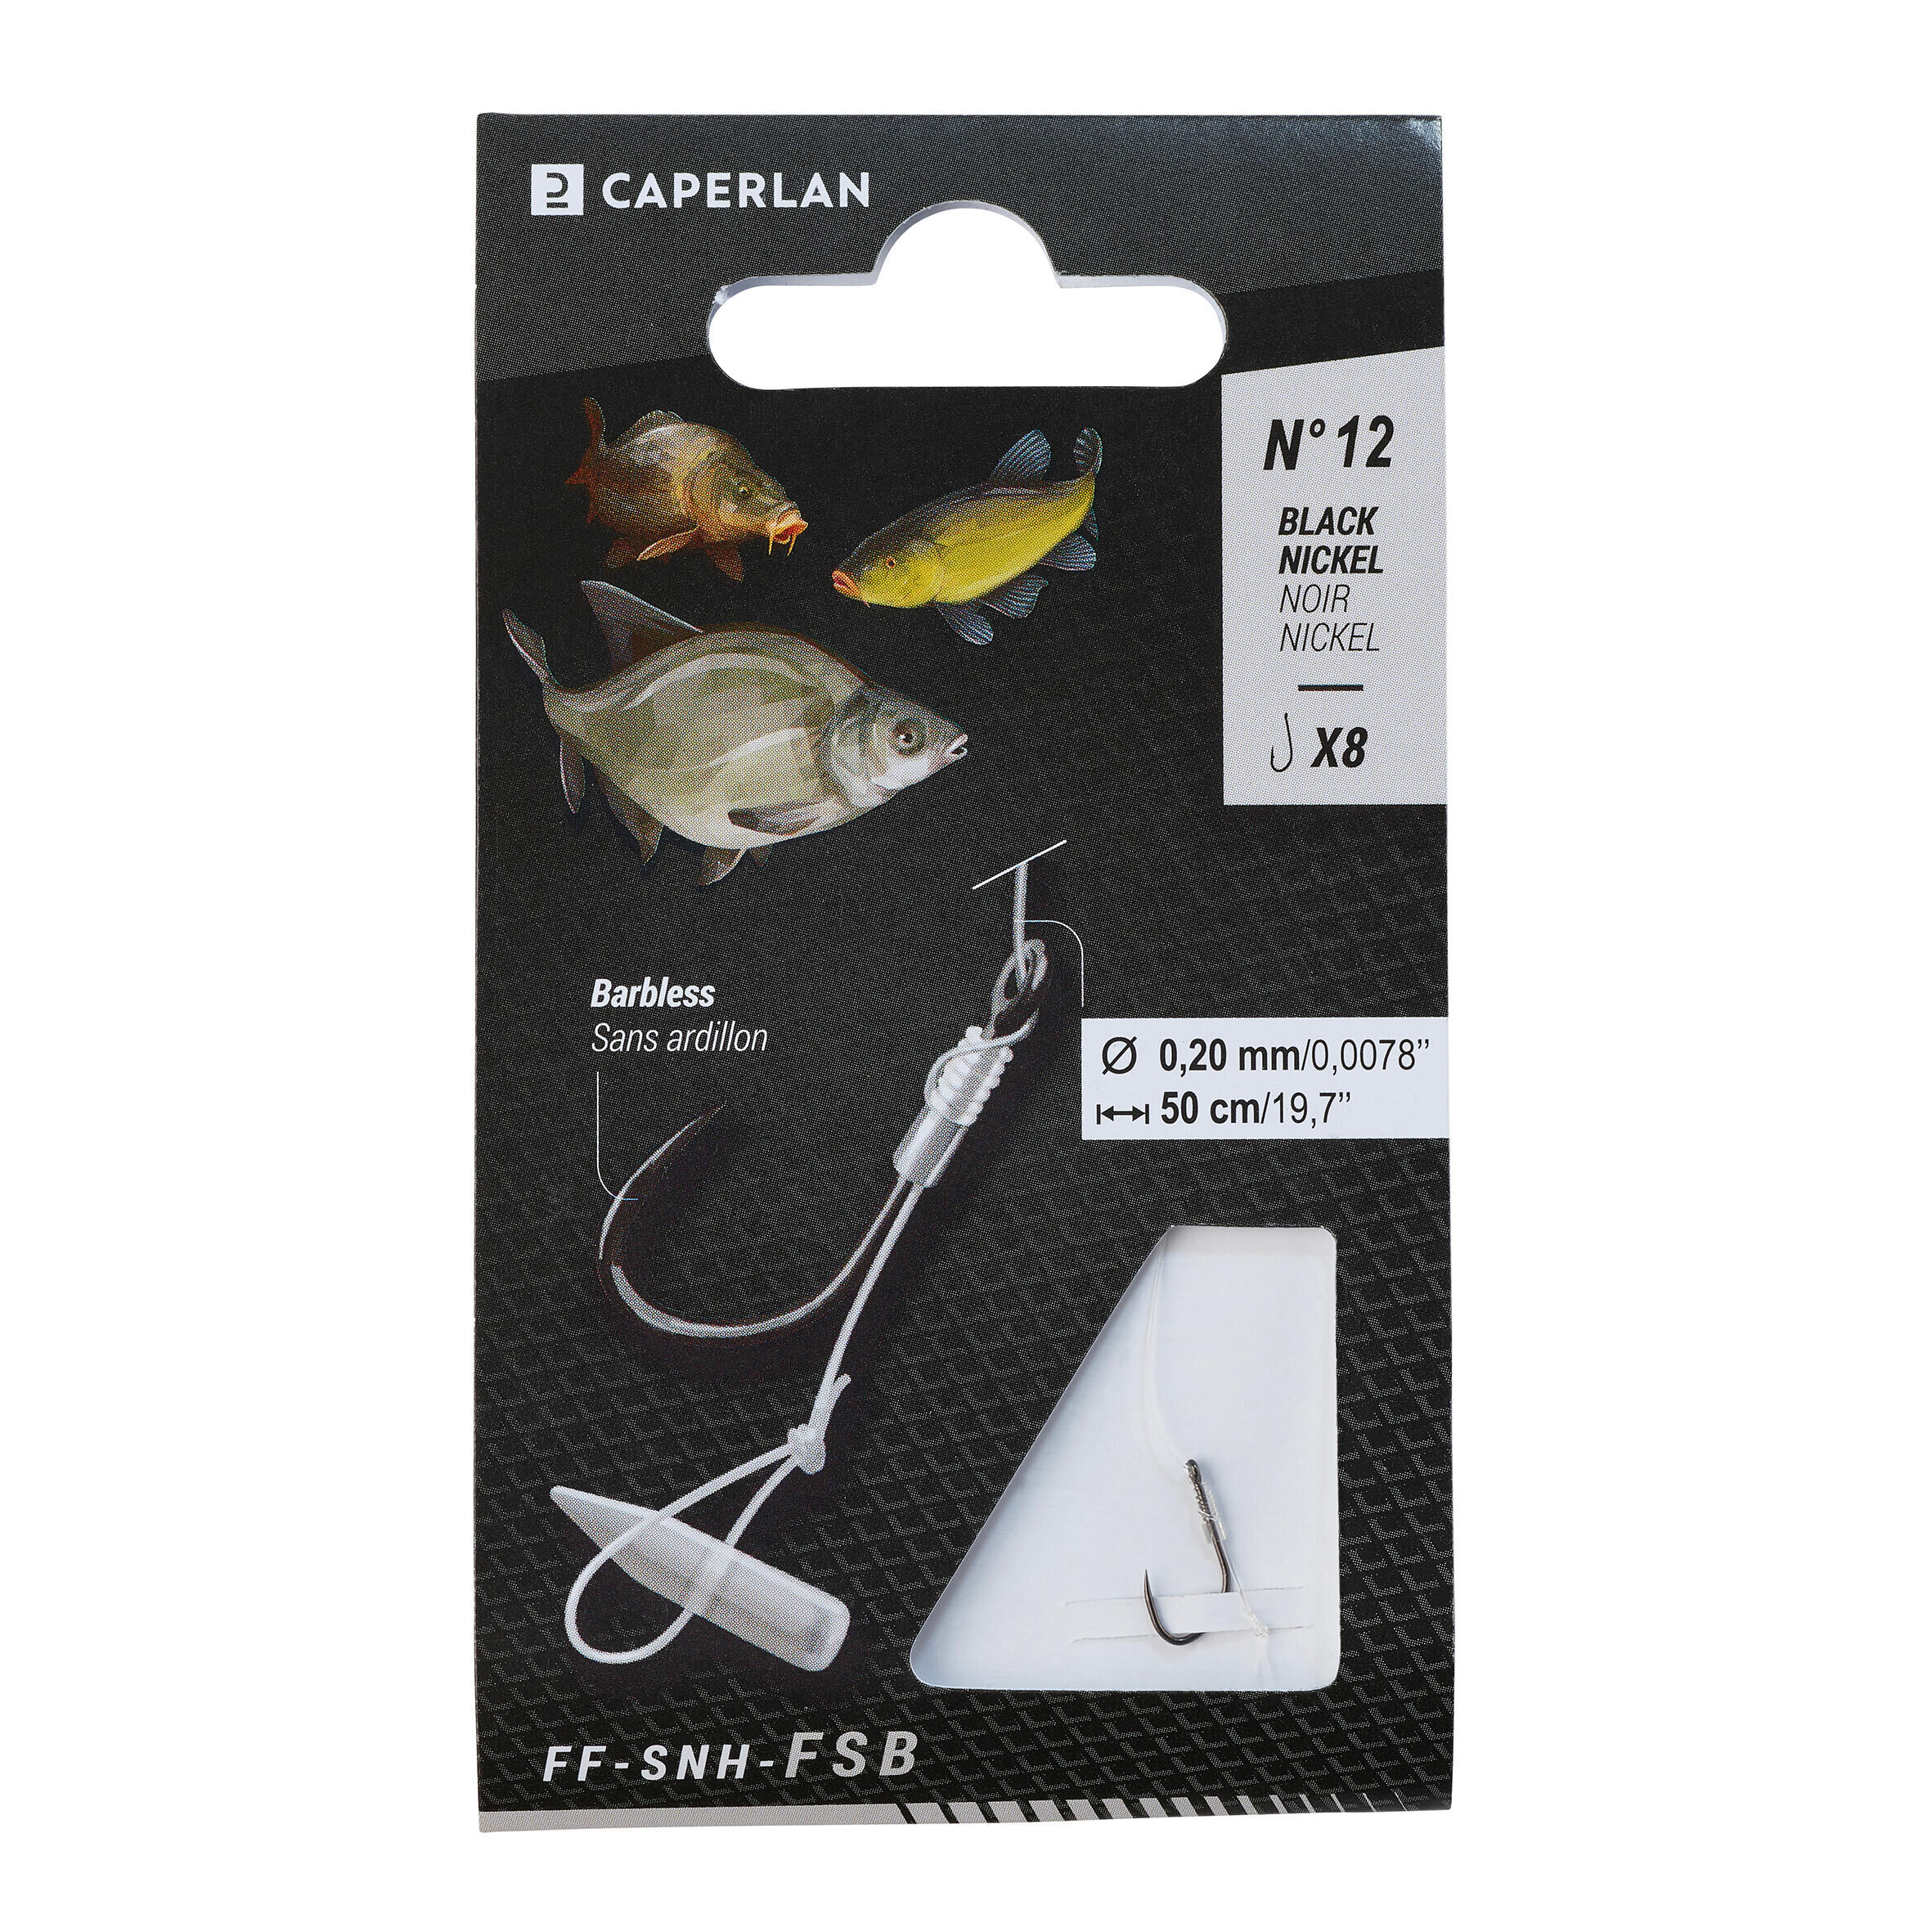 CAPERLAN Fishing Leader with Bait Stop for feeder fishing FF - SNH - FSB